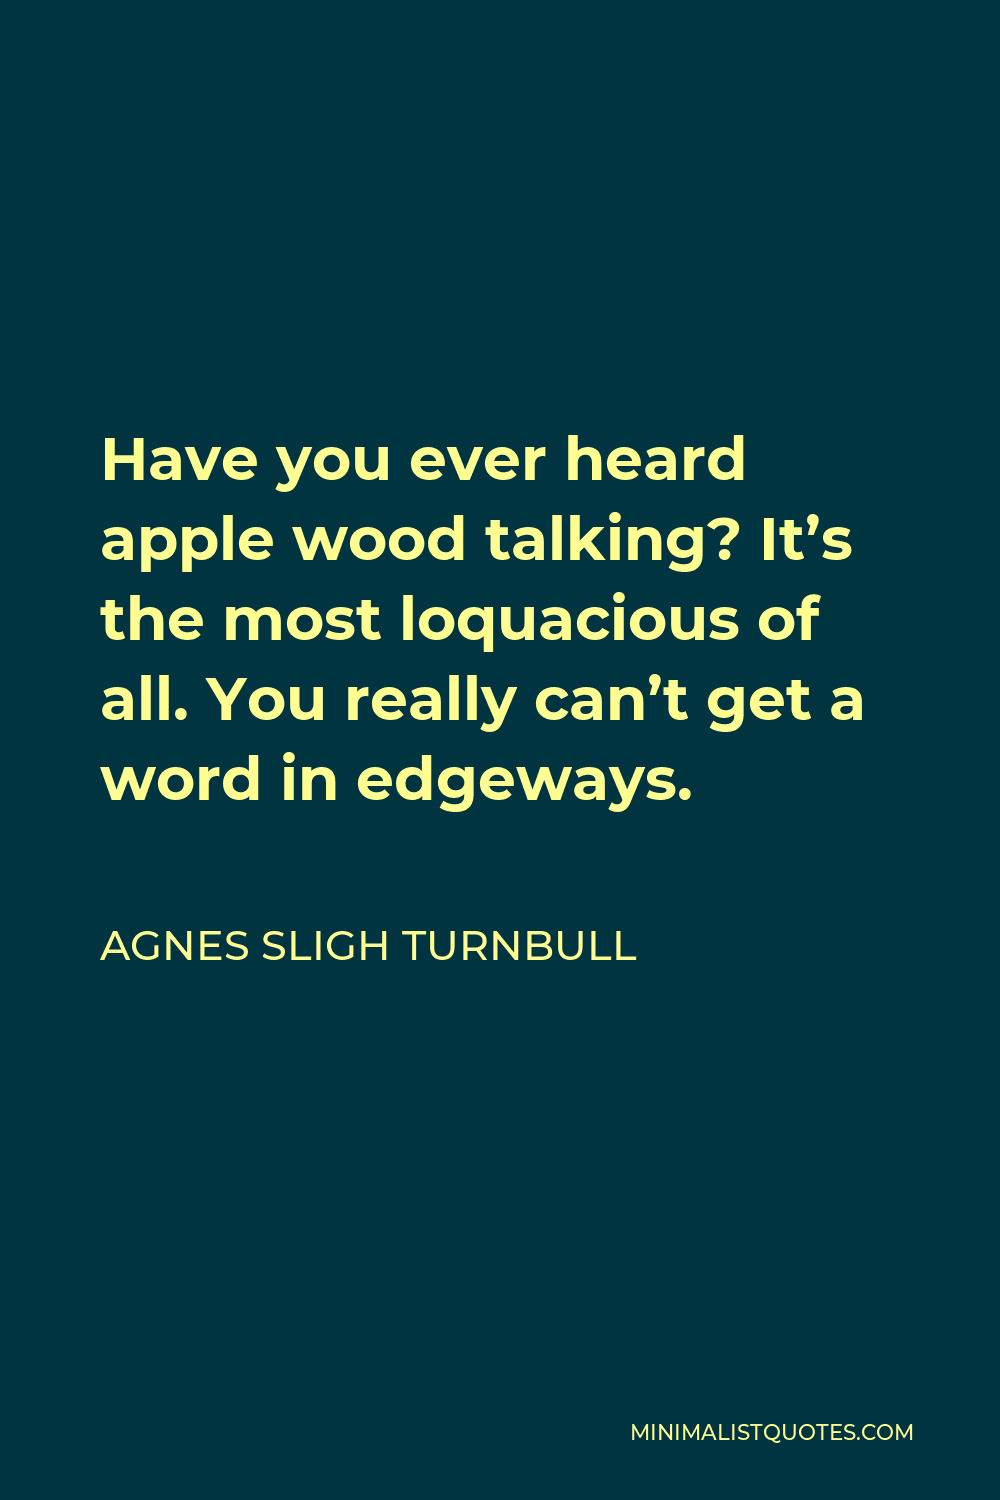 Agnes Sligh Turnbull Quote - Have you ever heard apple wood talking? It’s the most loquacious of all. You really can’t get a word in edgeways.